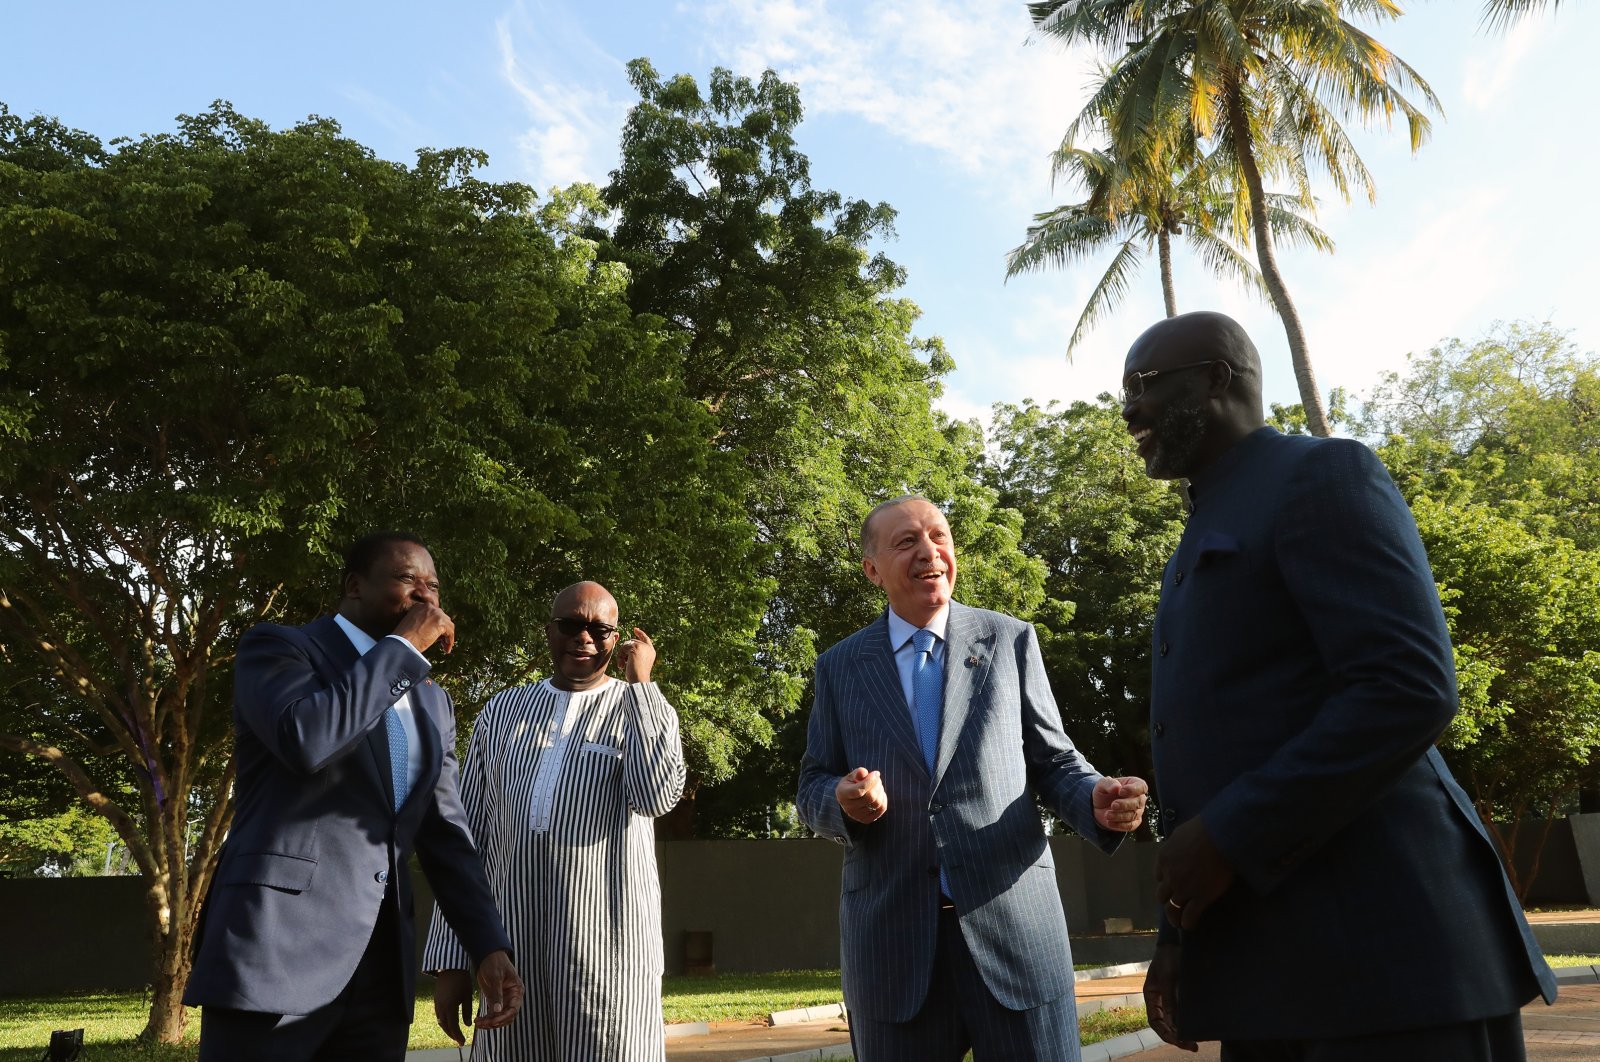 From left to right, Togo President Faure Gnassingbe, Burkina Faso President Christian Kabore, President Recep Tayyip Erdoğan and Liberia President George Weah talk ahead of a working dinner, in Lome, Togo, Oct. 19, 2021. (AA Photo)